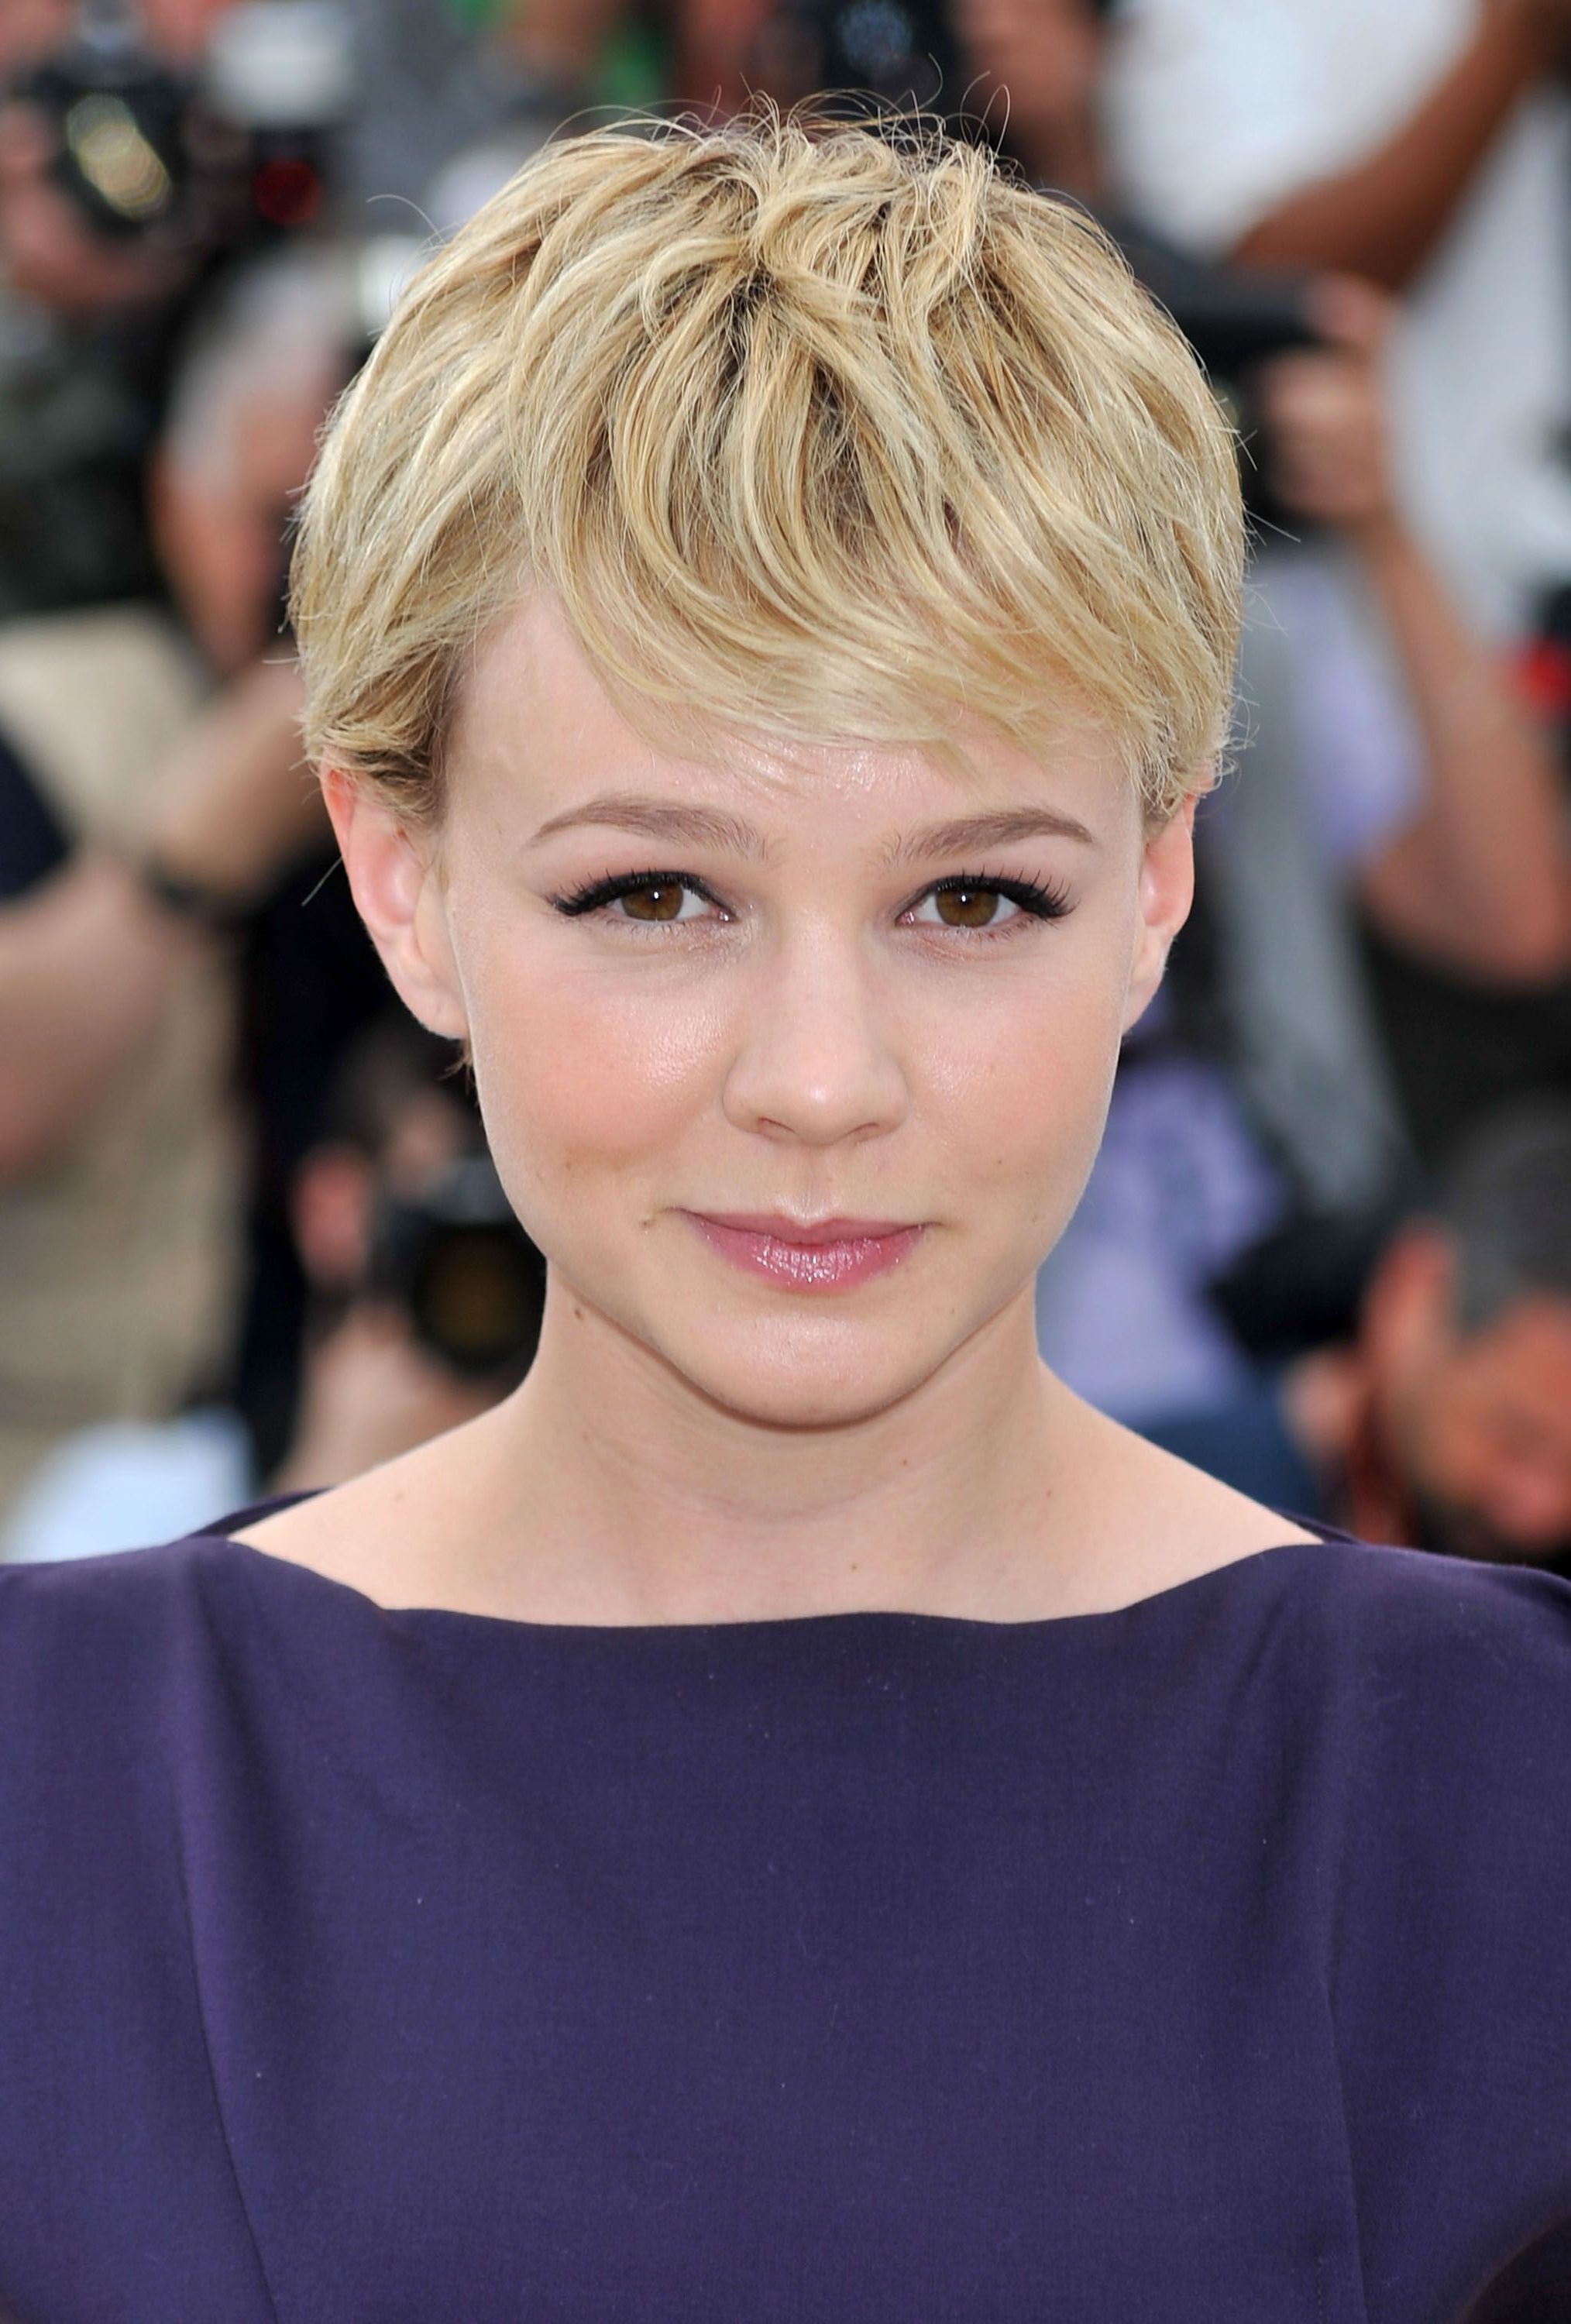 65 Best Short Hairstyles, Haircuts, And Short Hair Ideas For 2018 Intended For Short Feminine Hairstyles For Fine Hair (View 21 of 25)